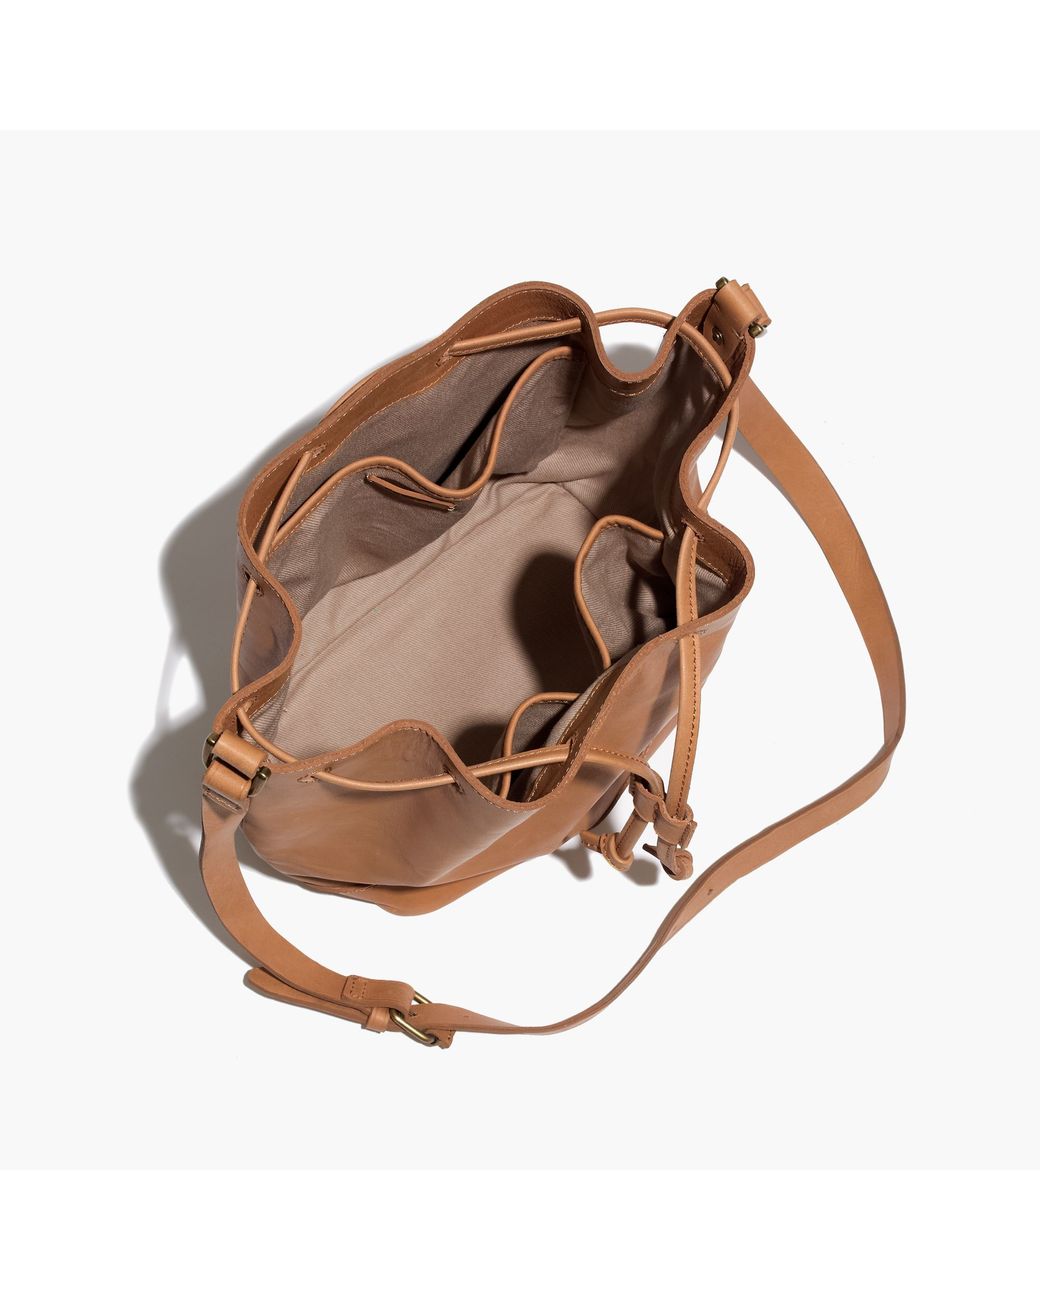 Madewell The Mini Lafayette Bucket Bag in Natural | Lyst